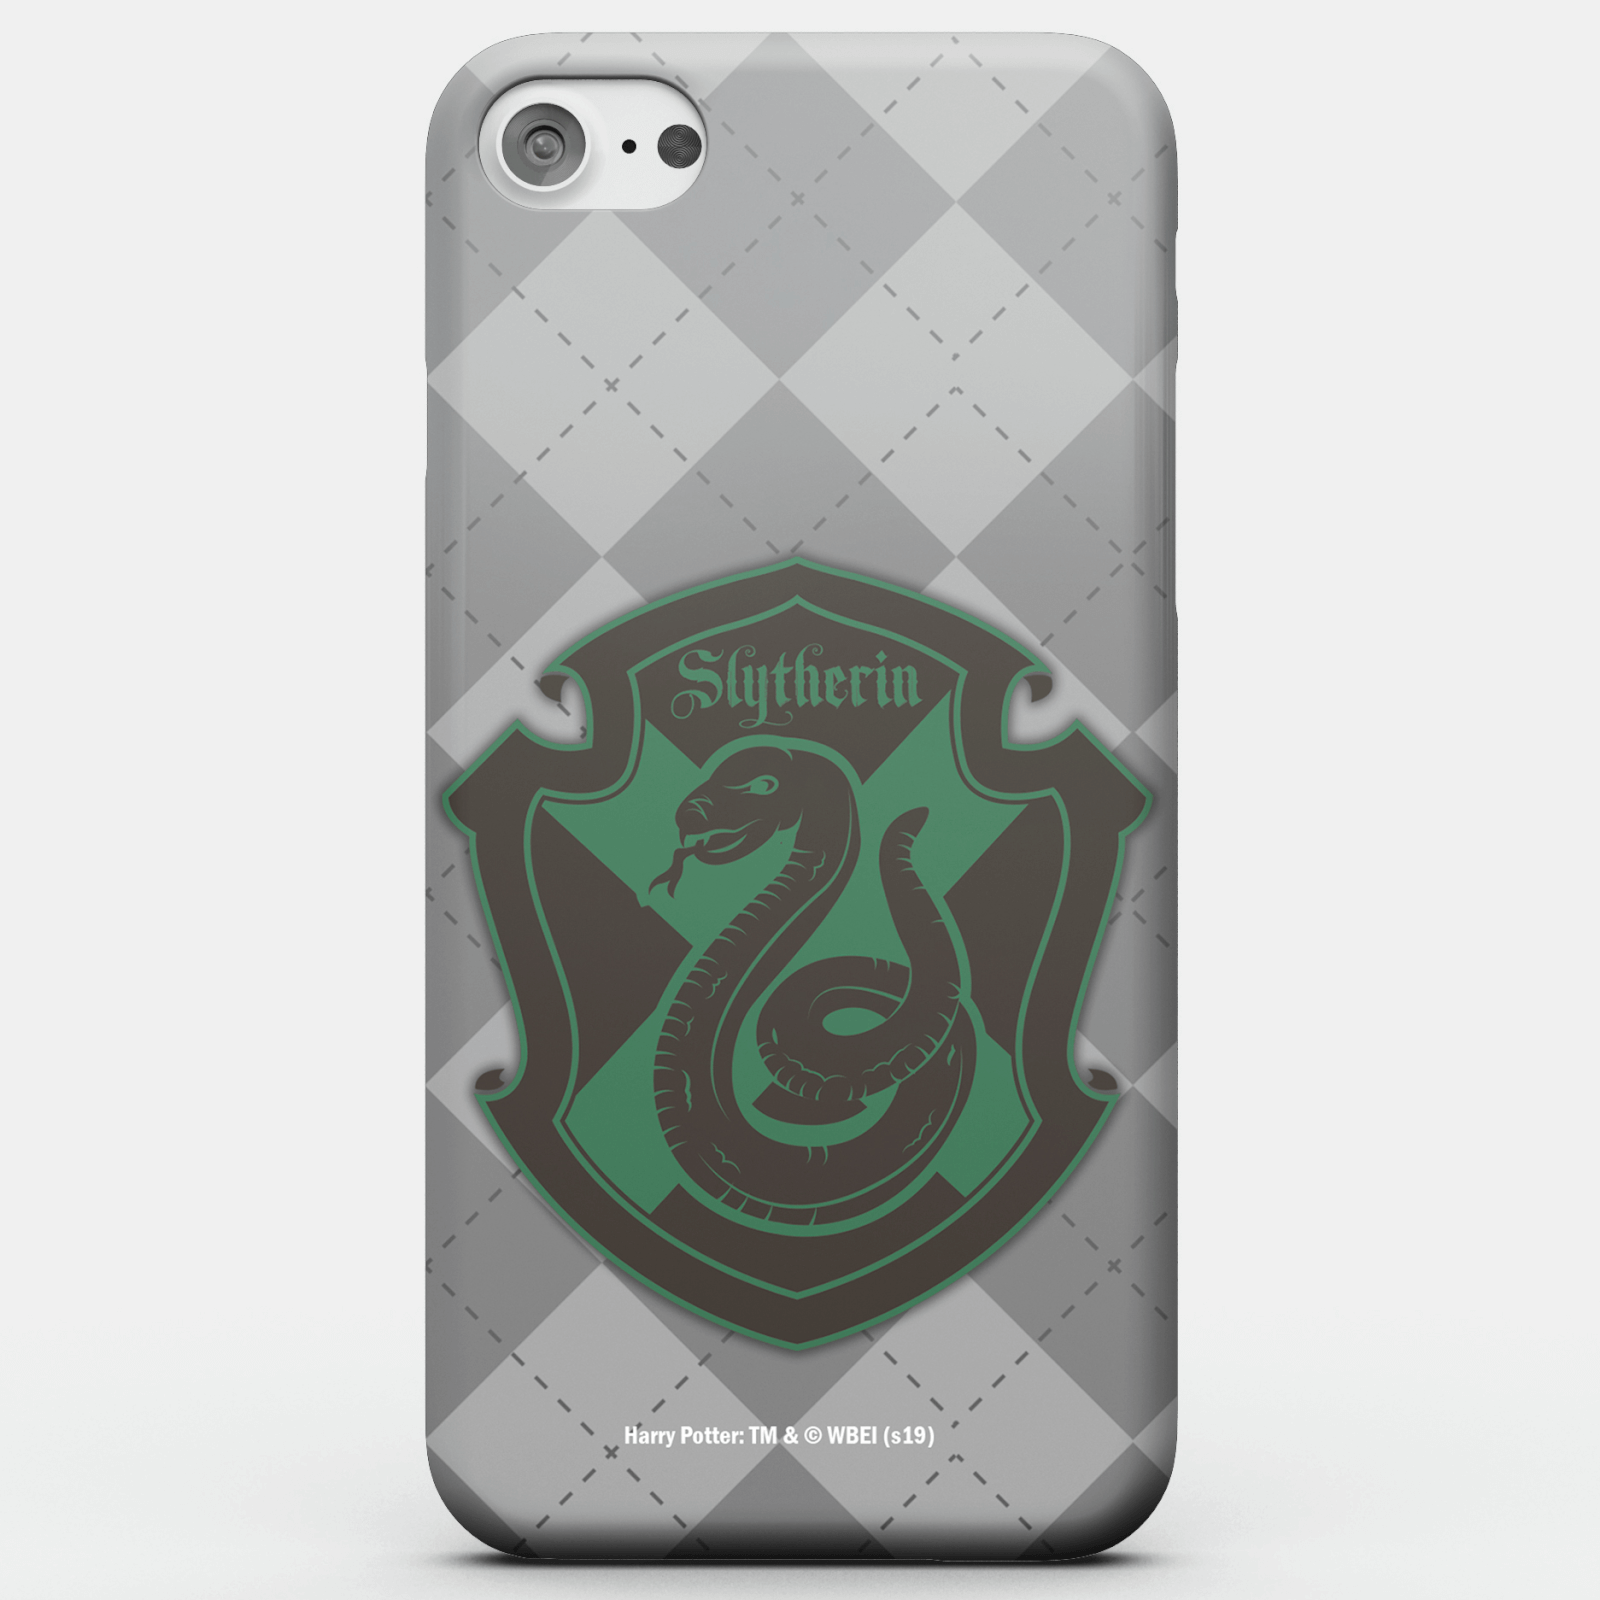 cover telefono harry potter phonecases serpeverde crest per iphone e android - samsung note 8 - cust